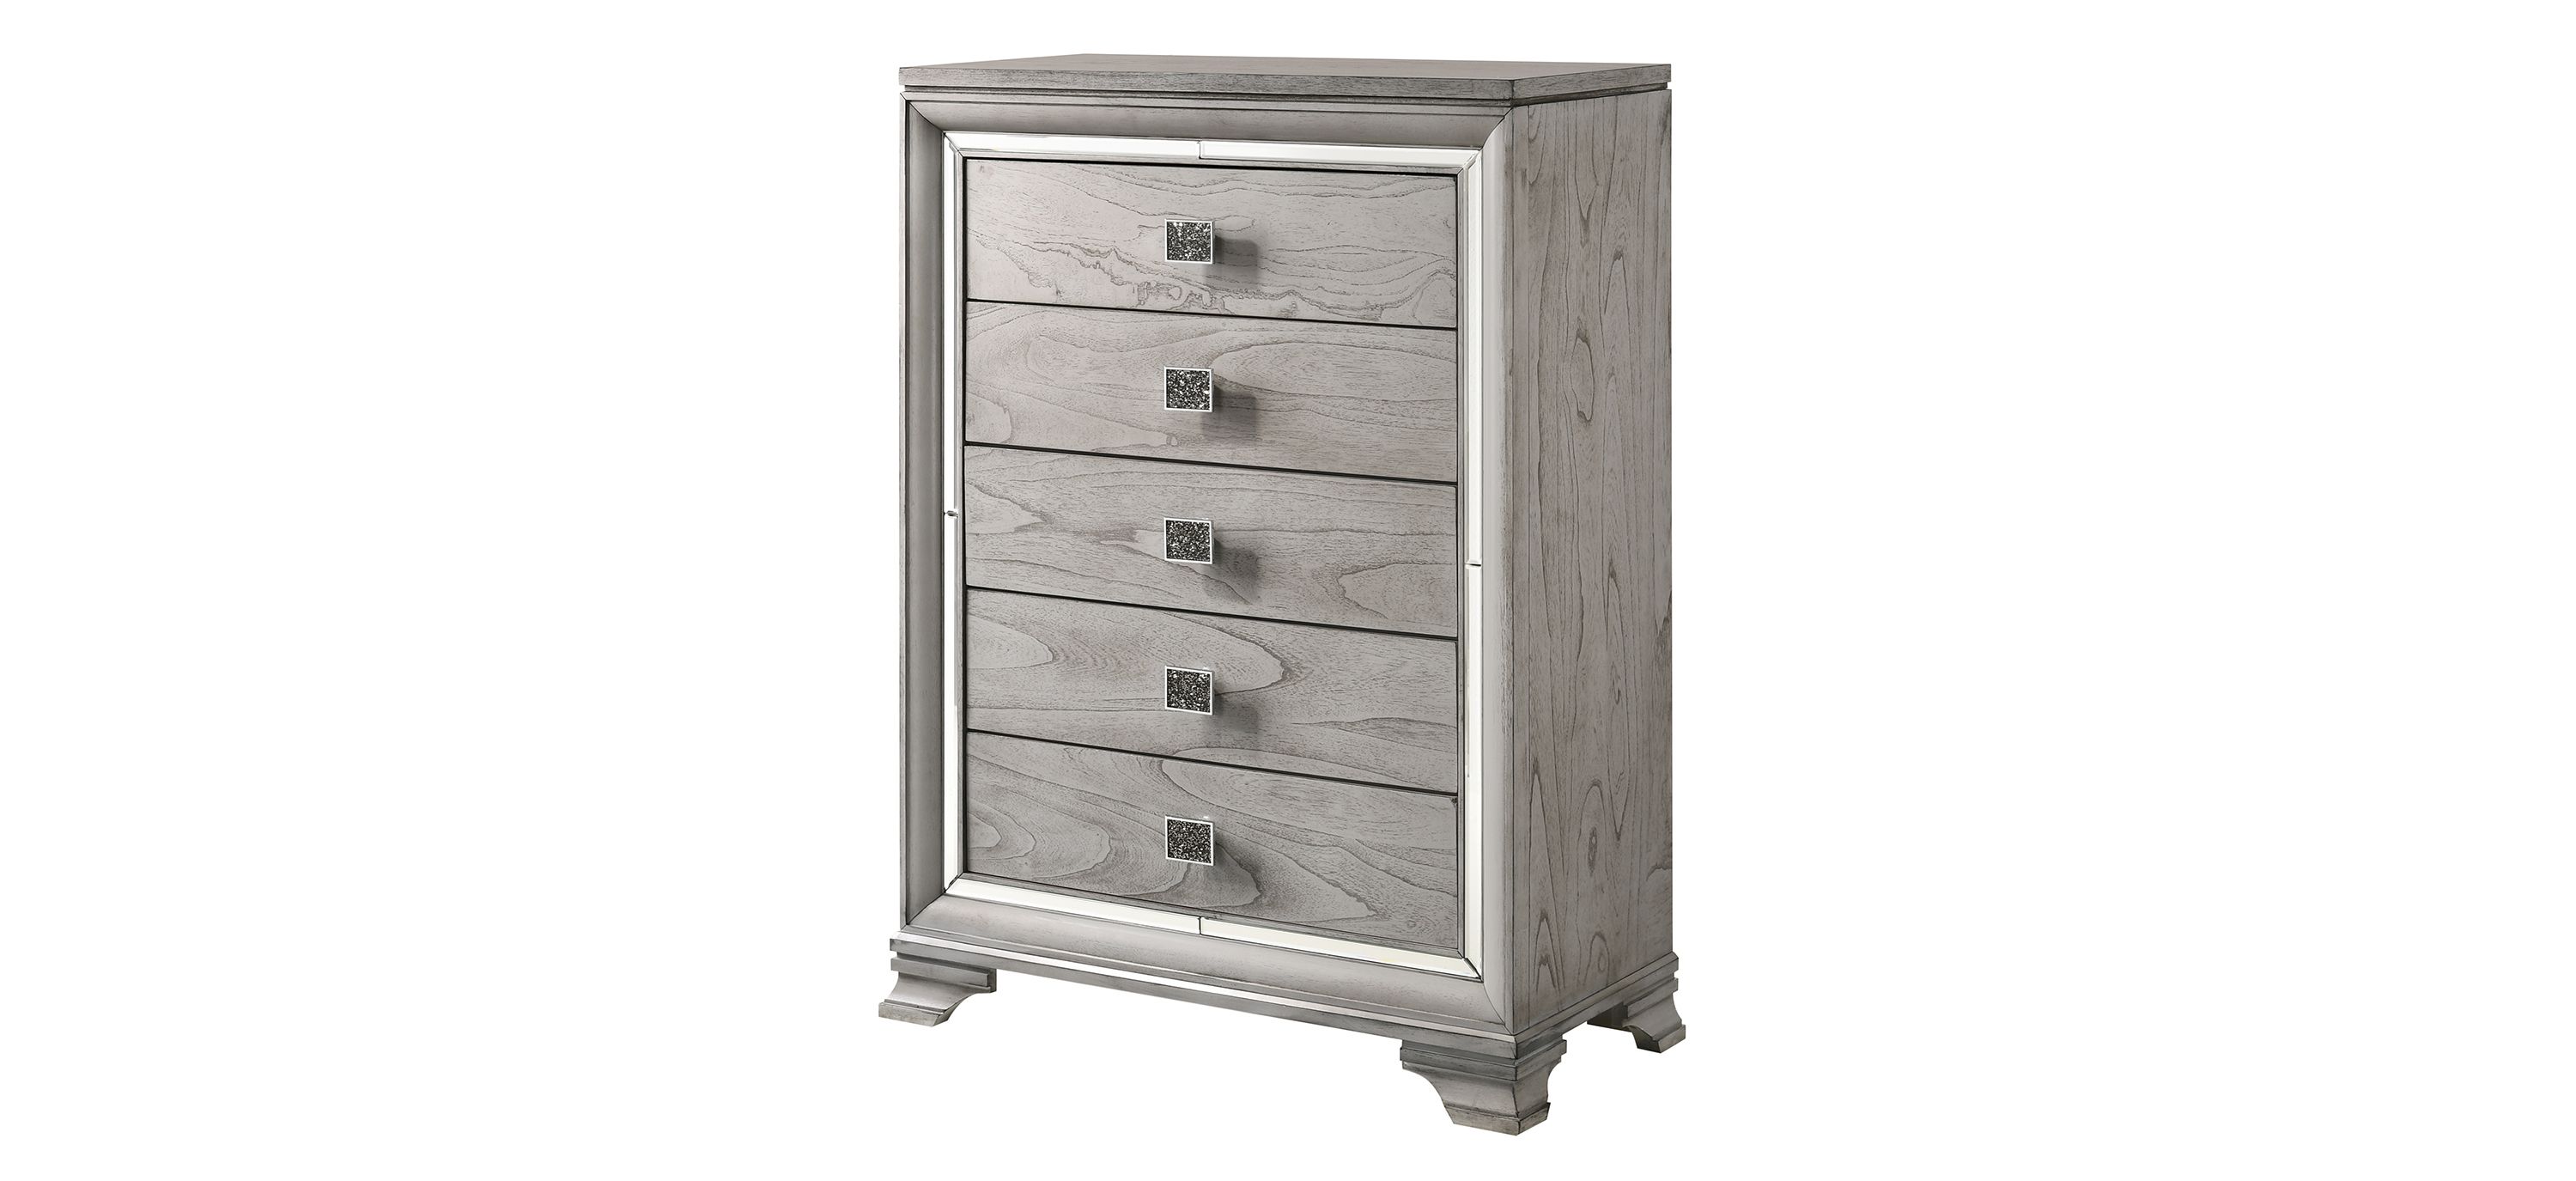 Vail Bedroom Chest